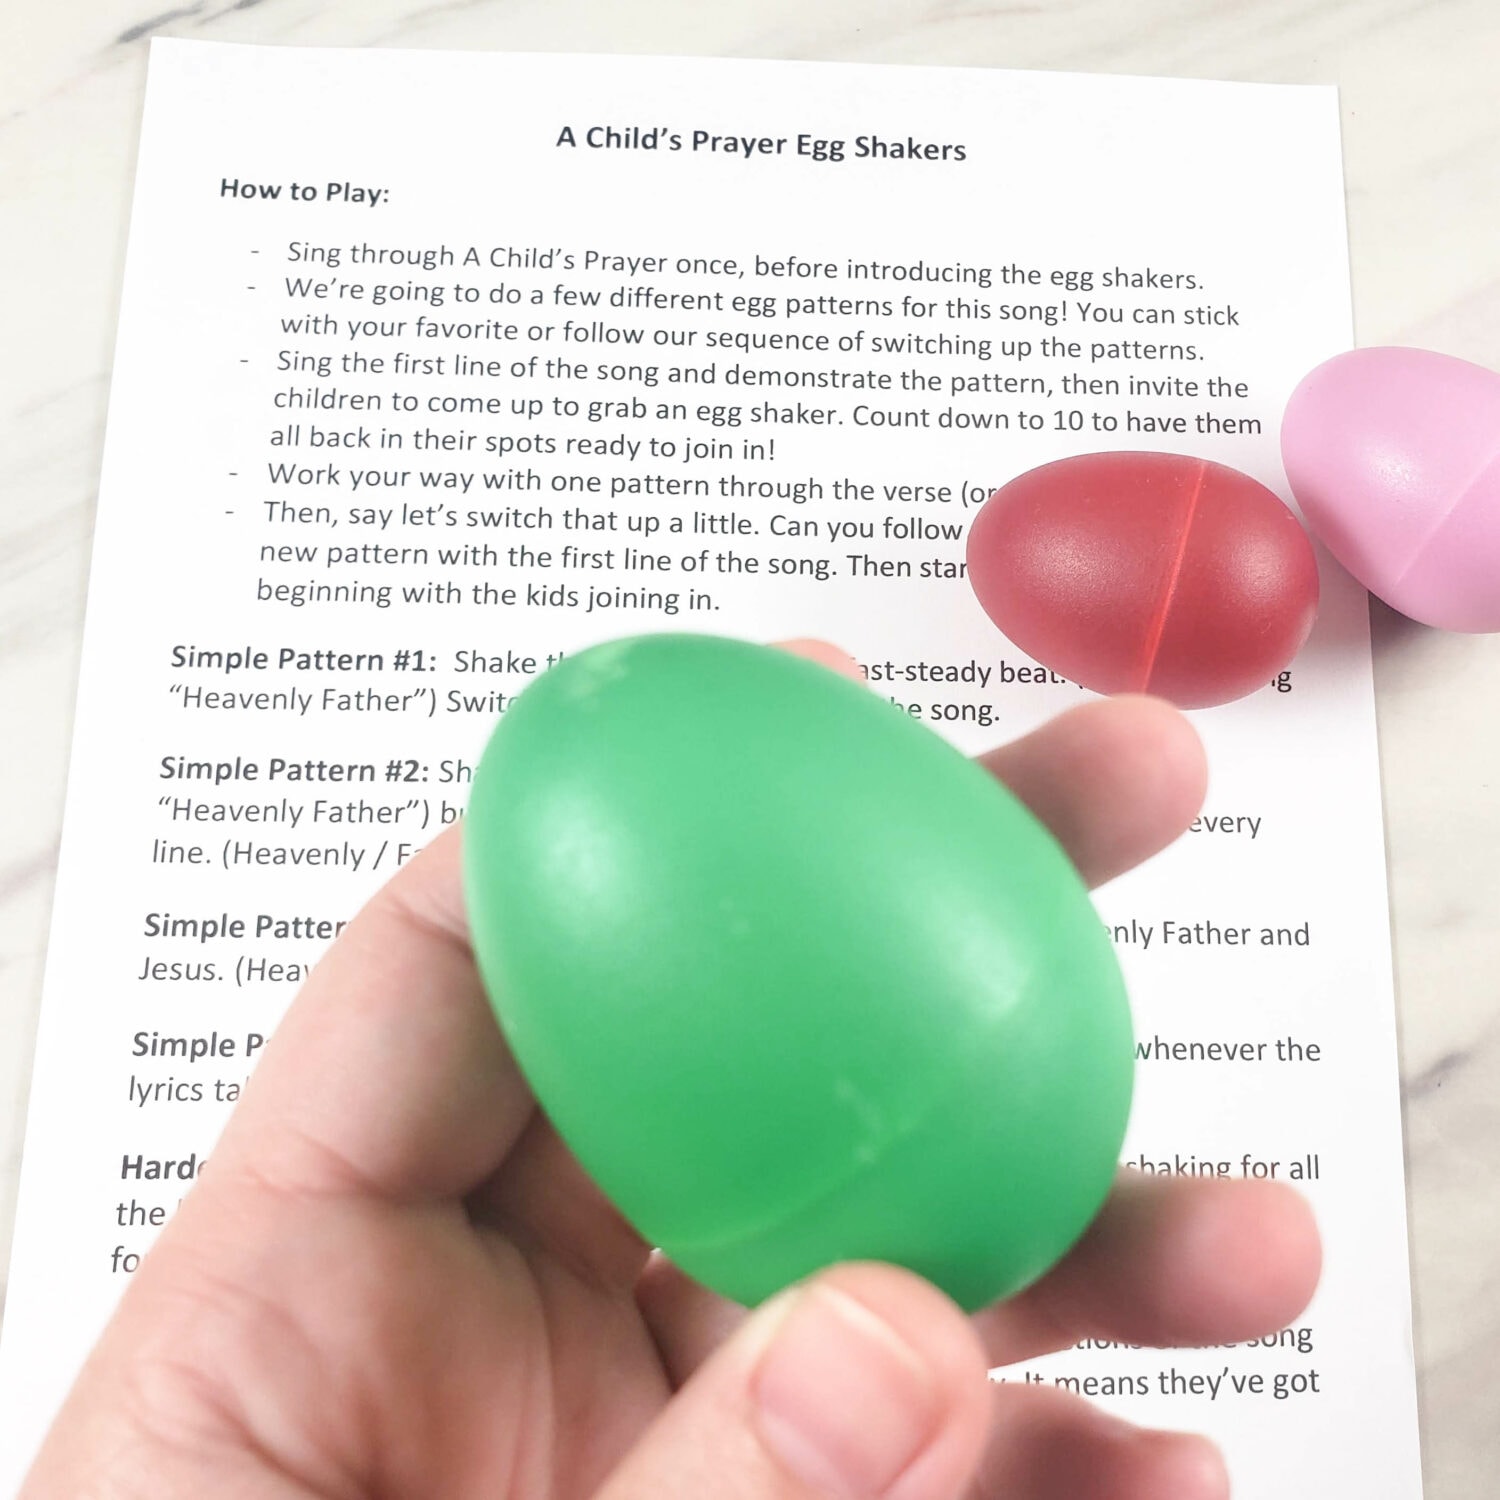 A Child's Prayer egg shakers fun singing time ideas with 4 simple patterns and 2 more challenging egg shaker patterns to have fun teaching this song for LDS Primary music leaders.